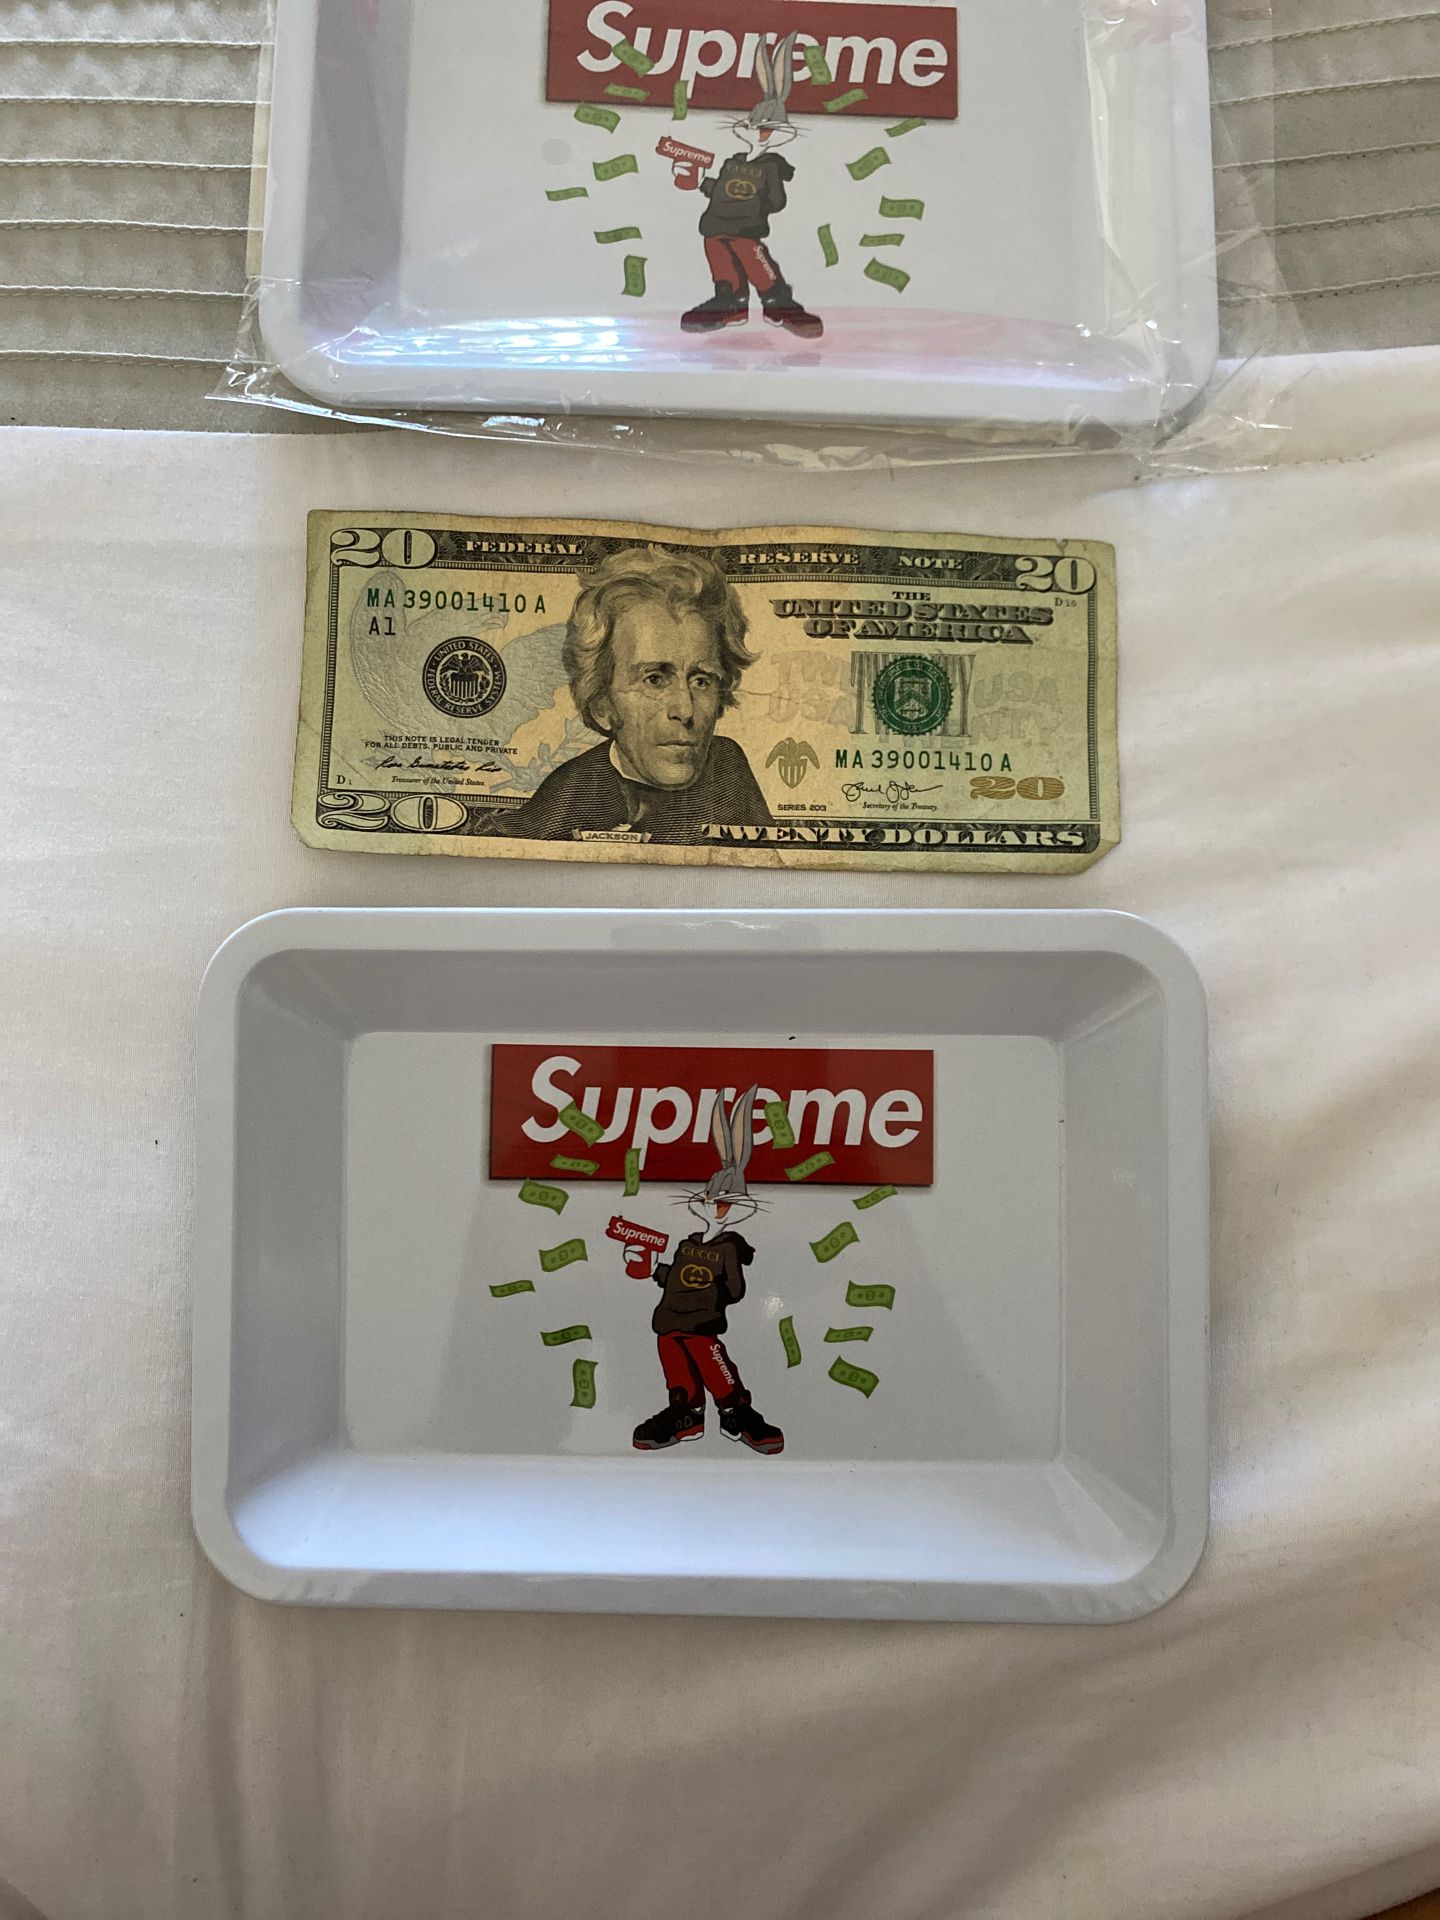 Supreme Bugs Bunny Rolling Tray for Sale in La Puente, CA - OfferUp